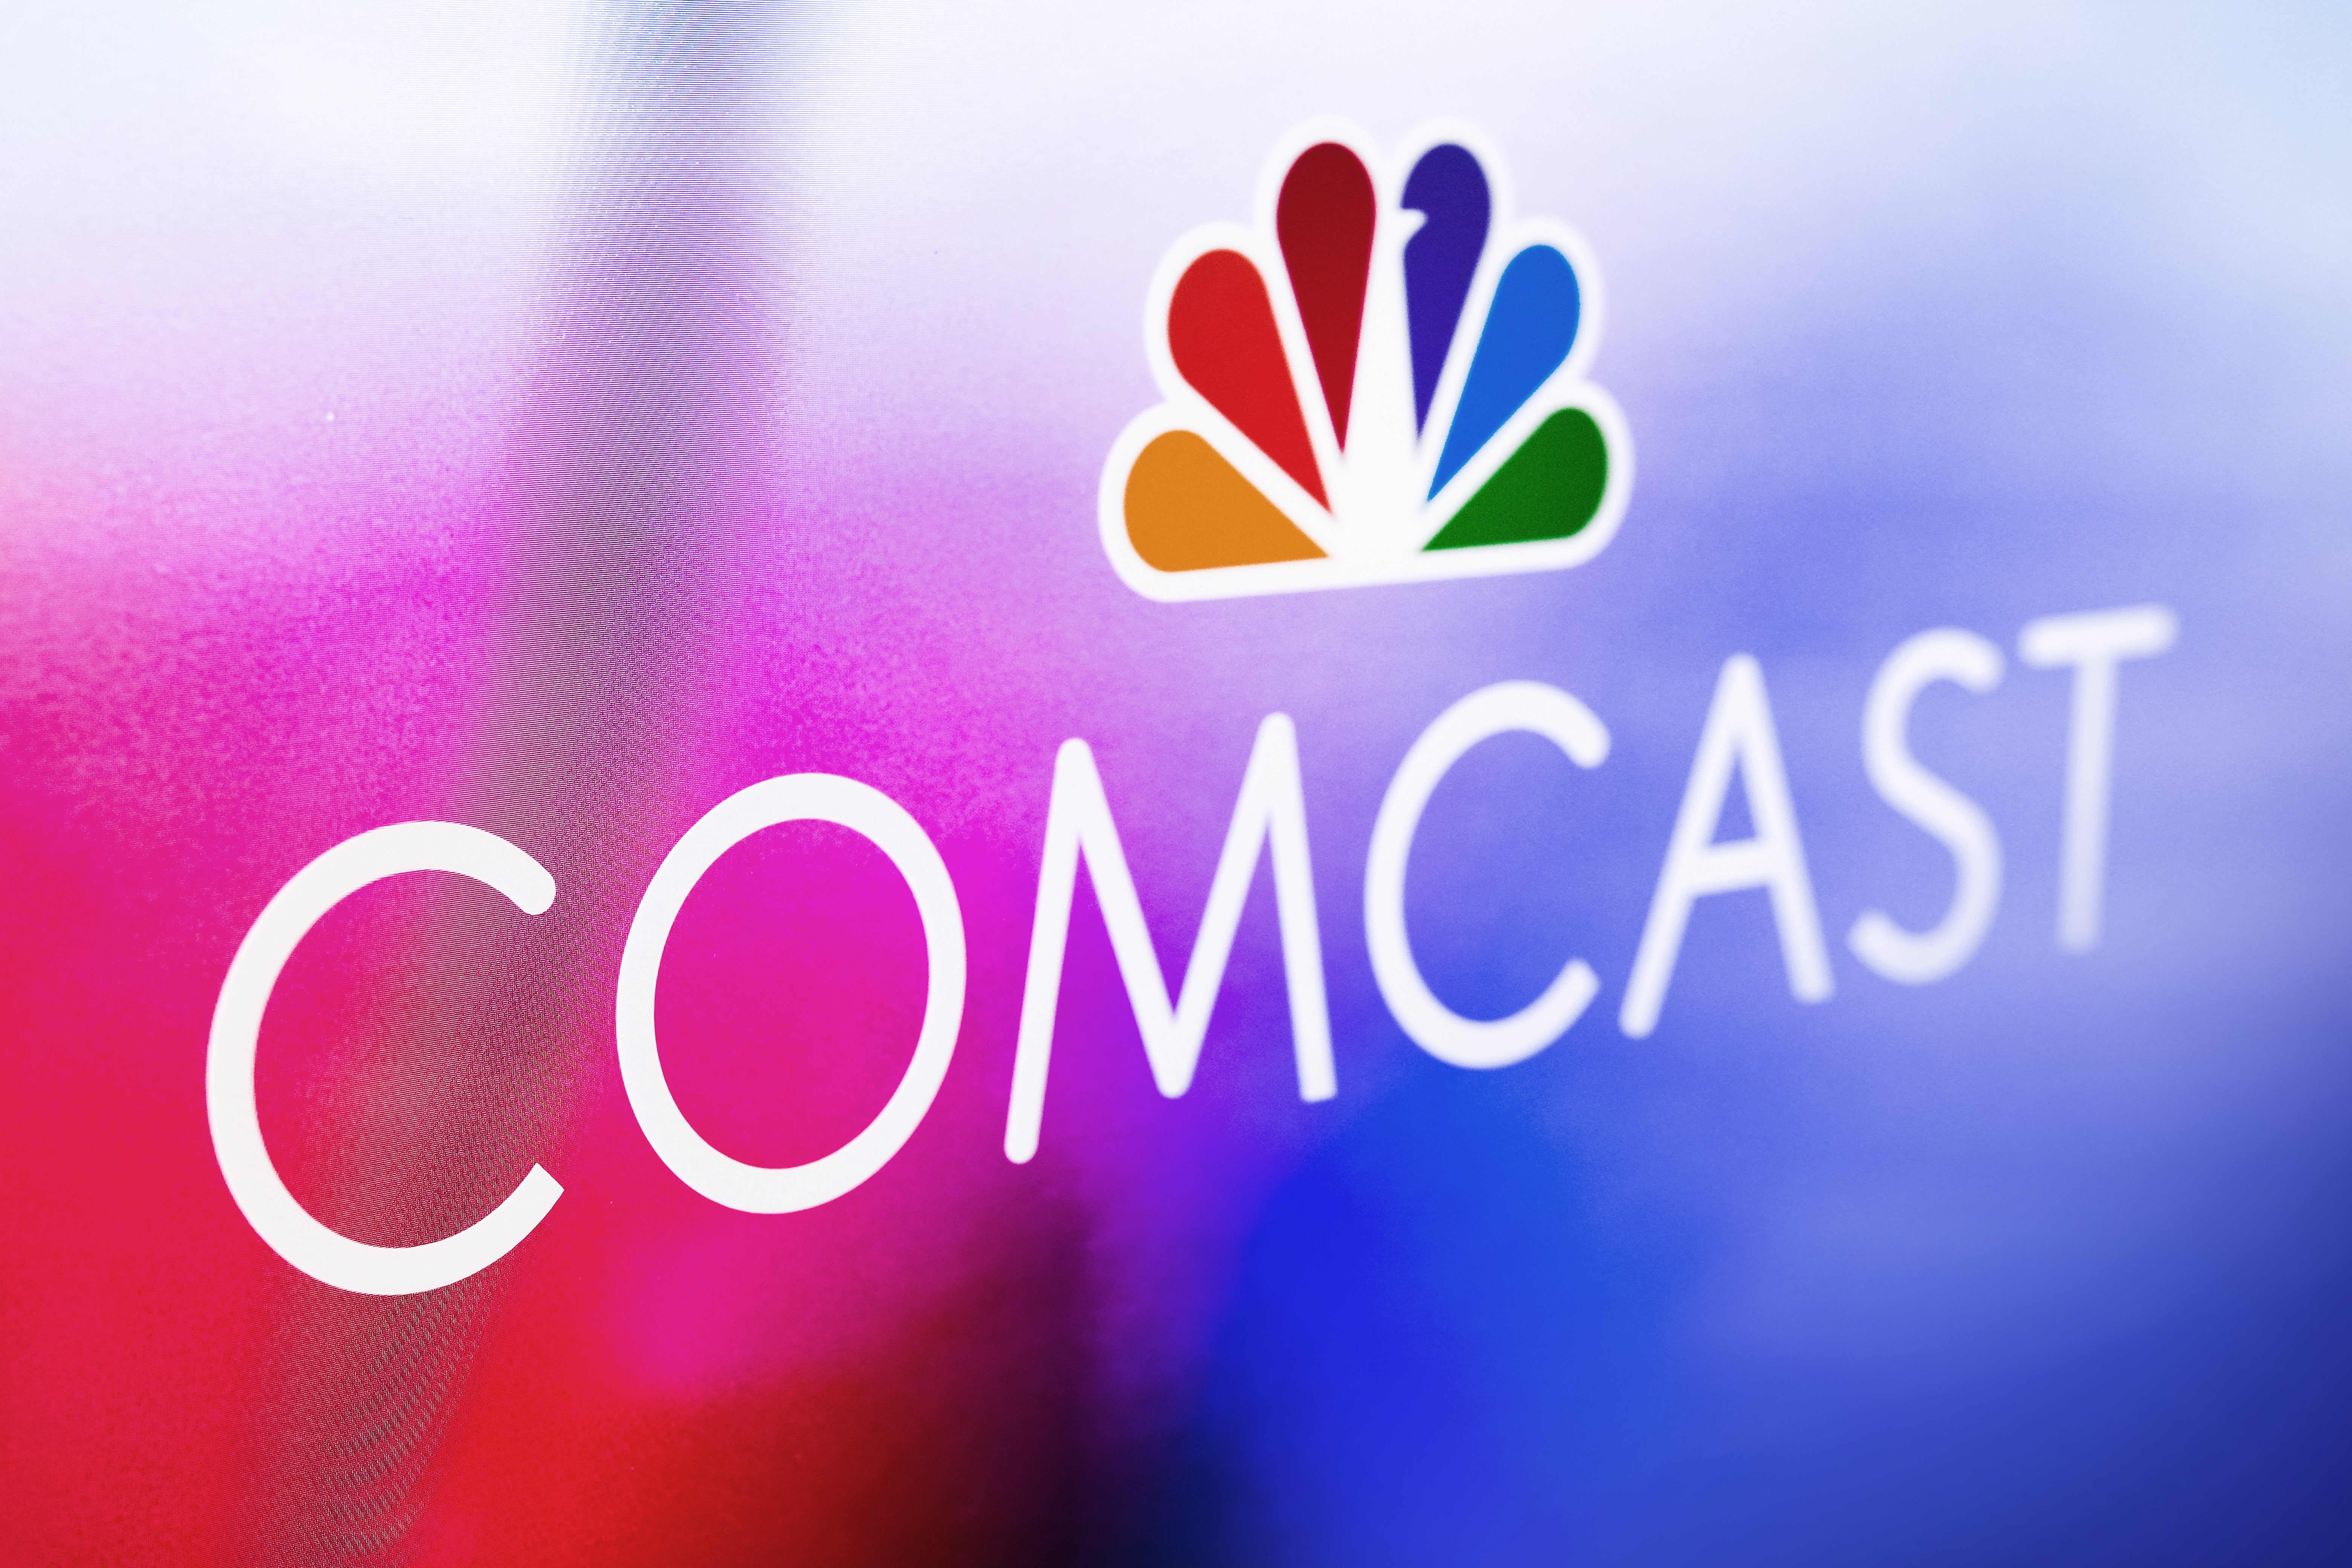 Comcast chief Brian Roberts made the bundle announcement while speaking at MoffettNathanson’s 2024 Media, Internet and Communications Conference in New York on Tuesday